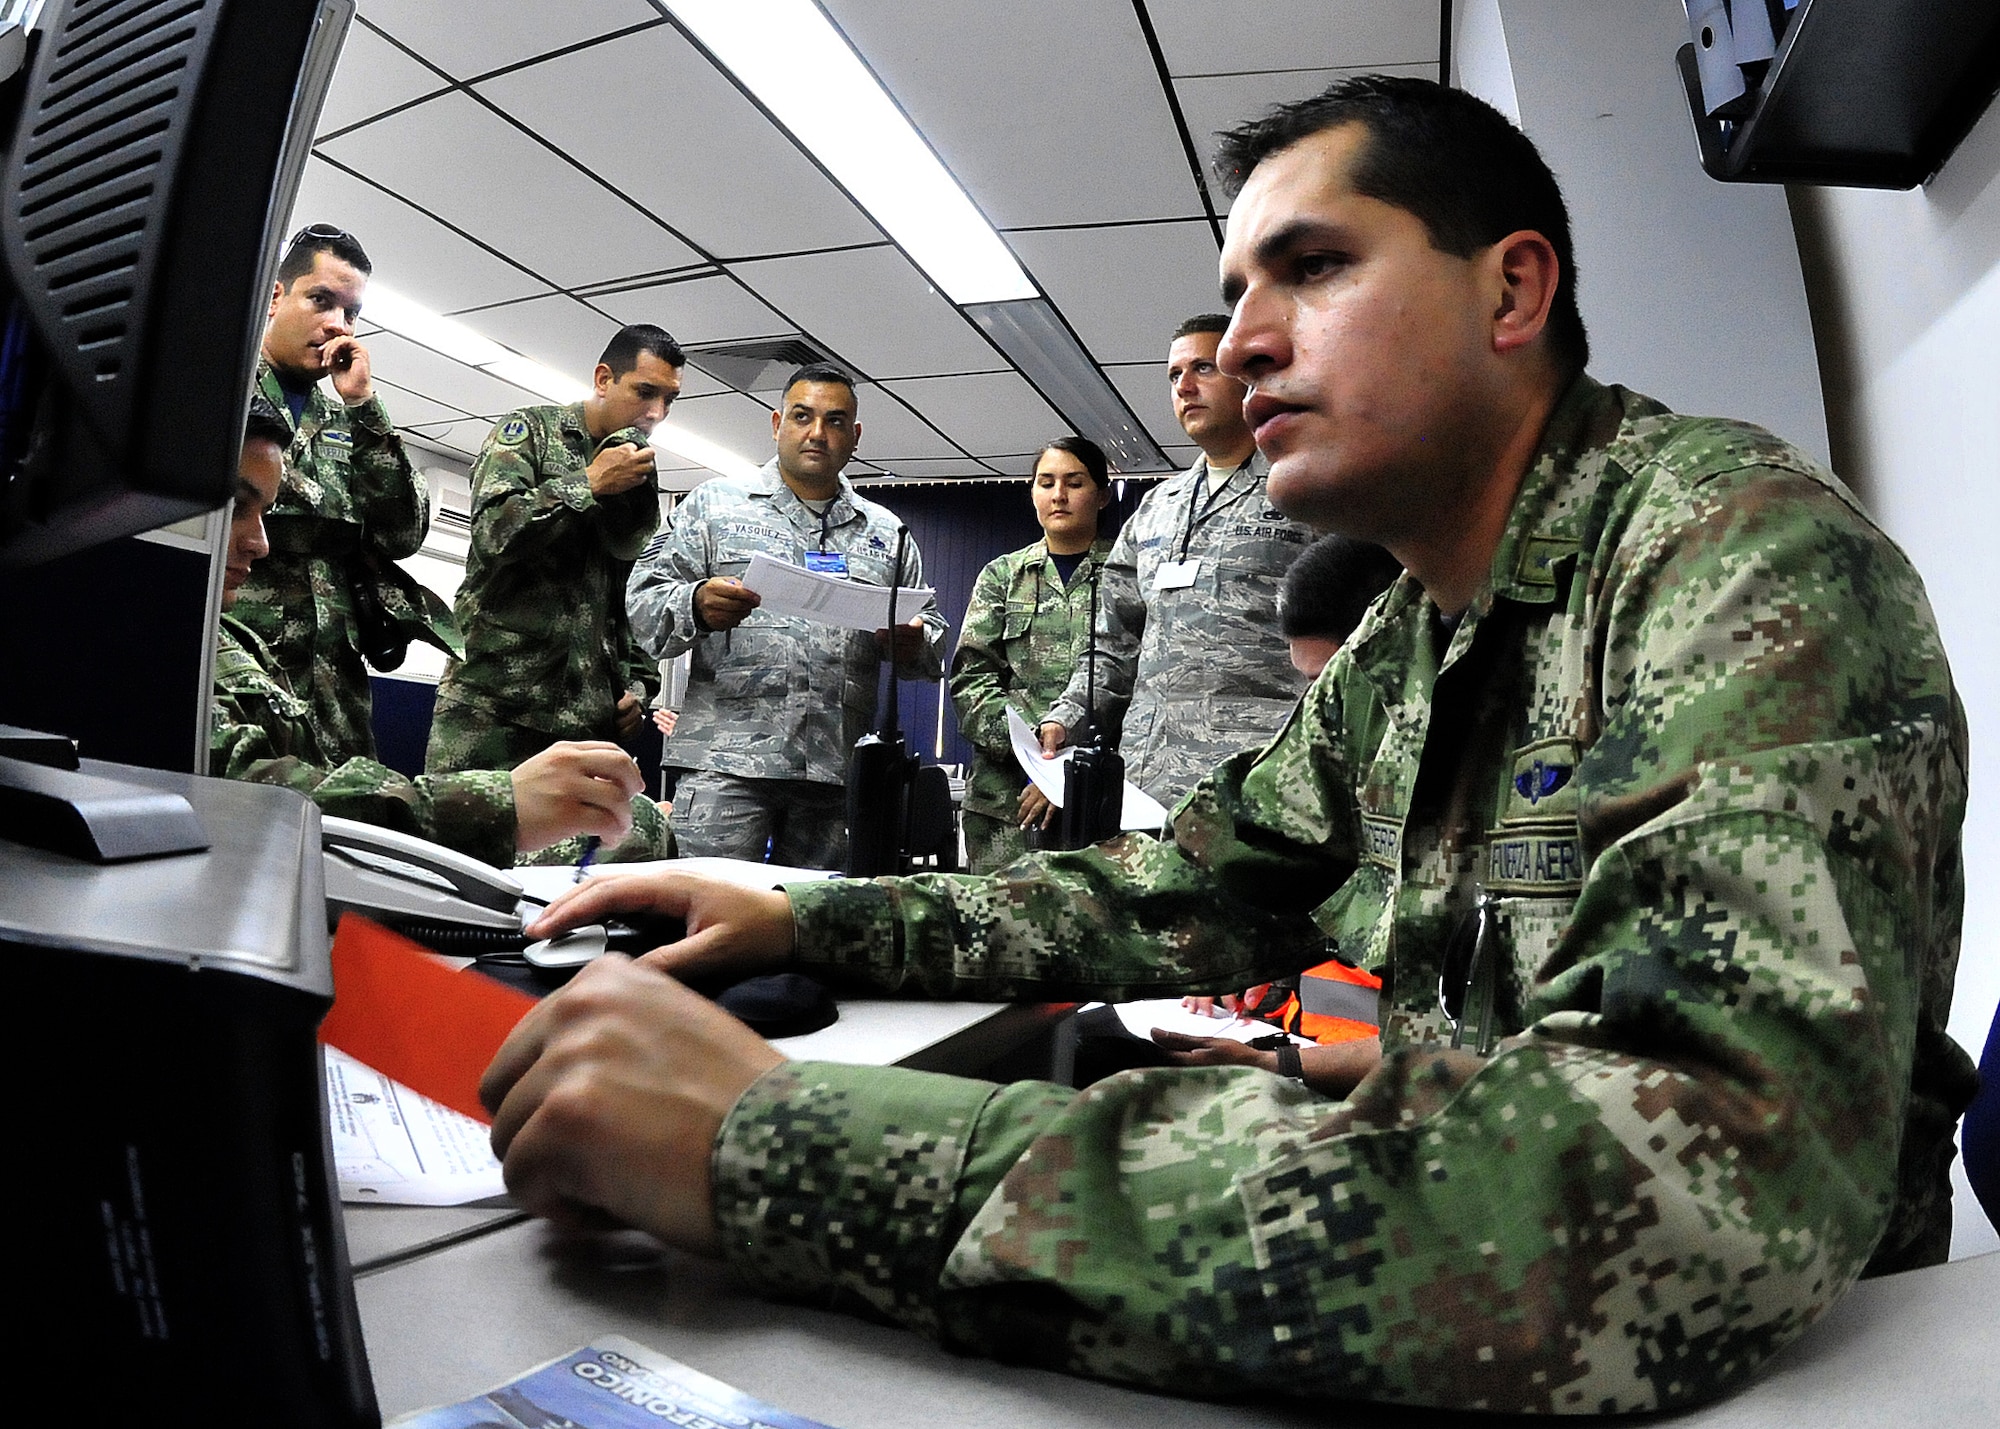 Master Sgt. Roberto Vasquez, 12th AF (AFSOUTH) heavy aircraft manager, and Technical Sgt. Melvin Rosario, Inter-American Air Forces Academy instructor, listen in as members of the Colombian air force maintenance operations centers go over the evening's flight schedule before the MOC briefing for senior leadership June 15, at Comando Aéreo de Combate No. 1 base, Palanquero, Colombia, as part of a month-long Air Mobility Command Building Partner Capacity mission. (U.S. Air Force photo by Tech. Sgt. Lesley Waters)